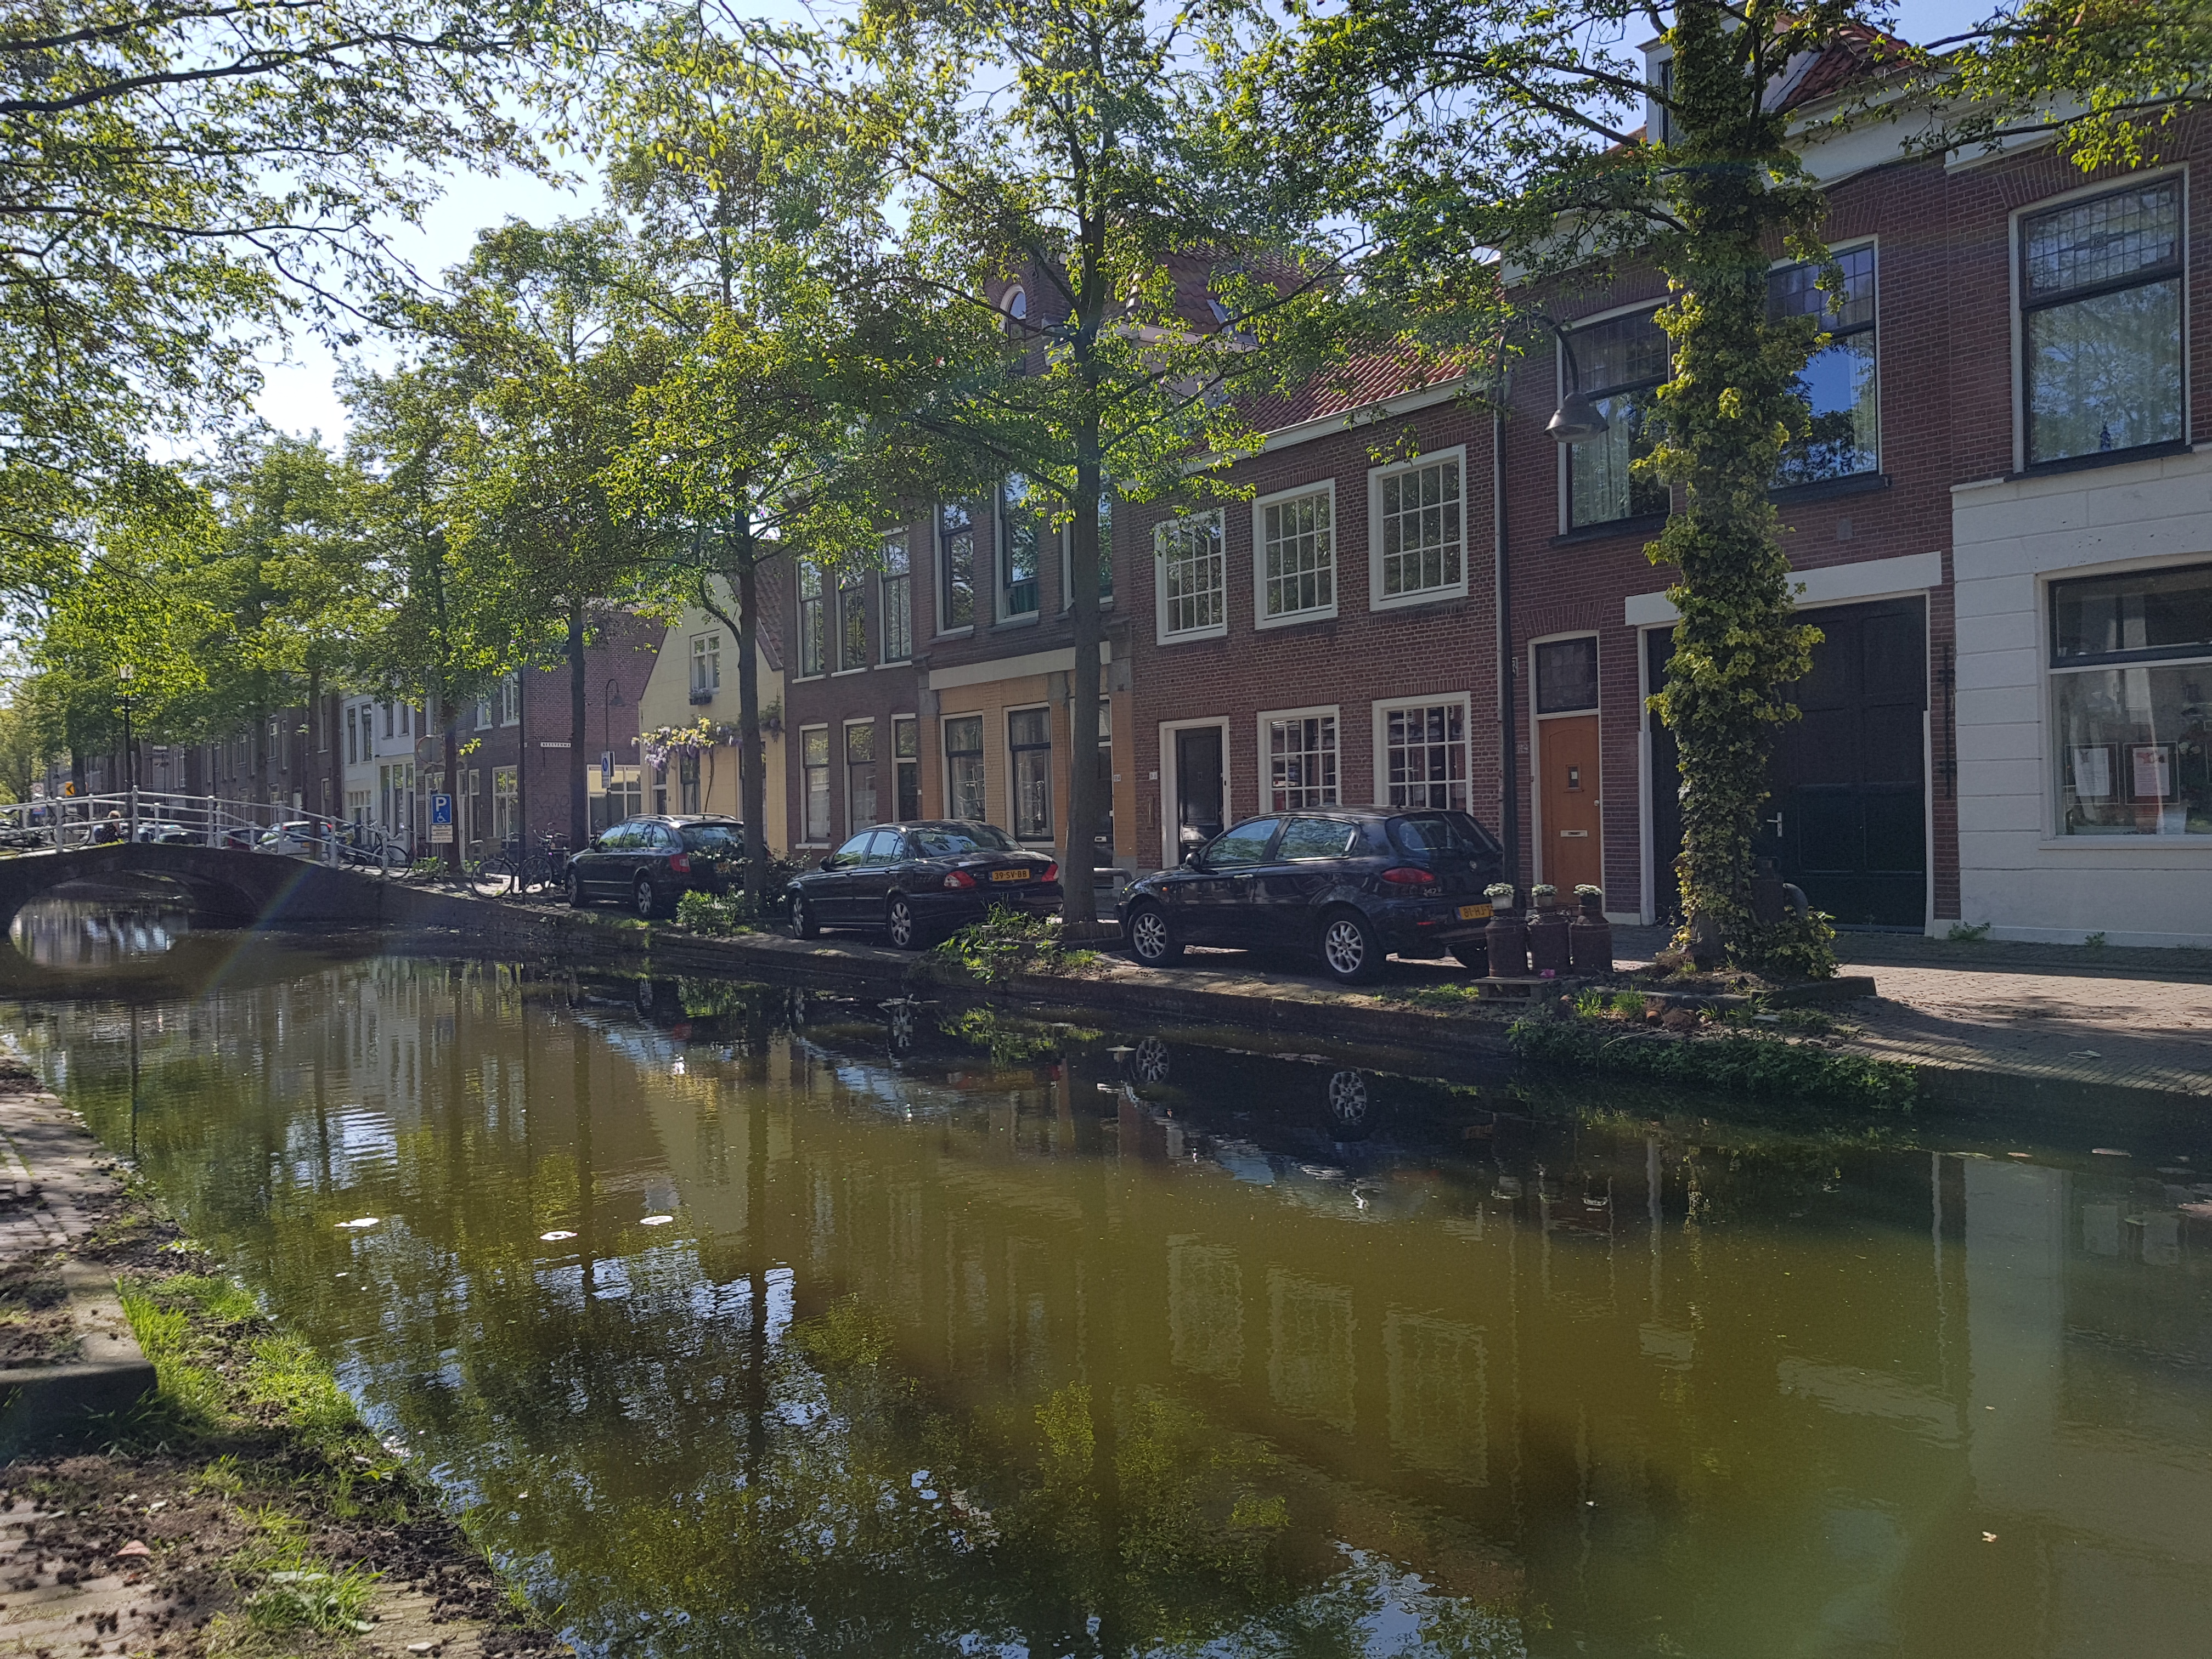 Dutch-style historic row houses along a canal with green water and blue skies with white clouds. Cars are parked along the canal.